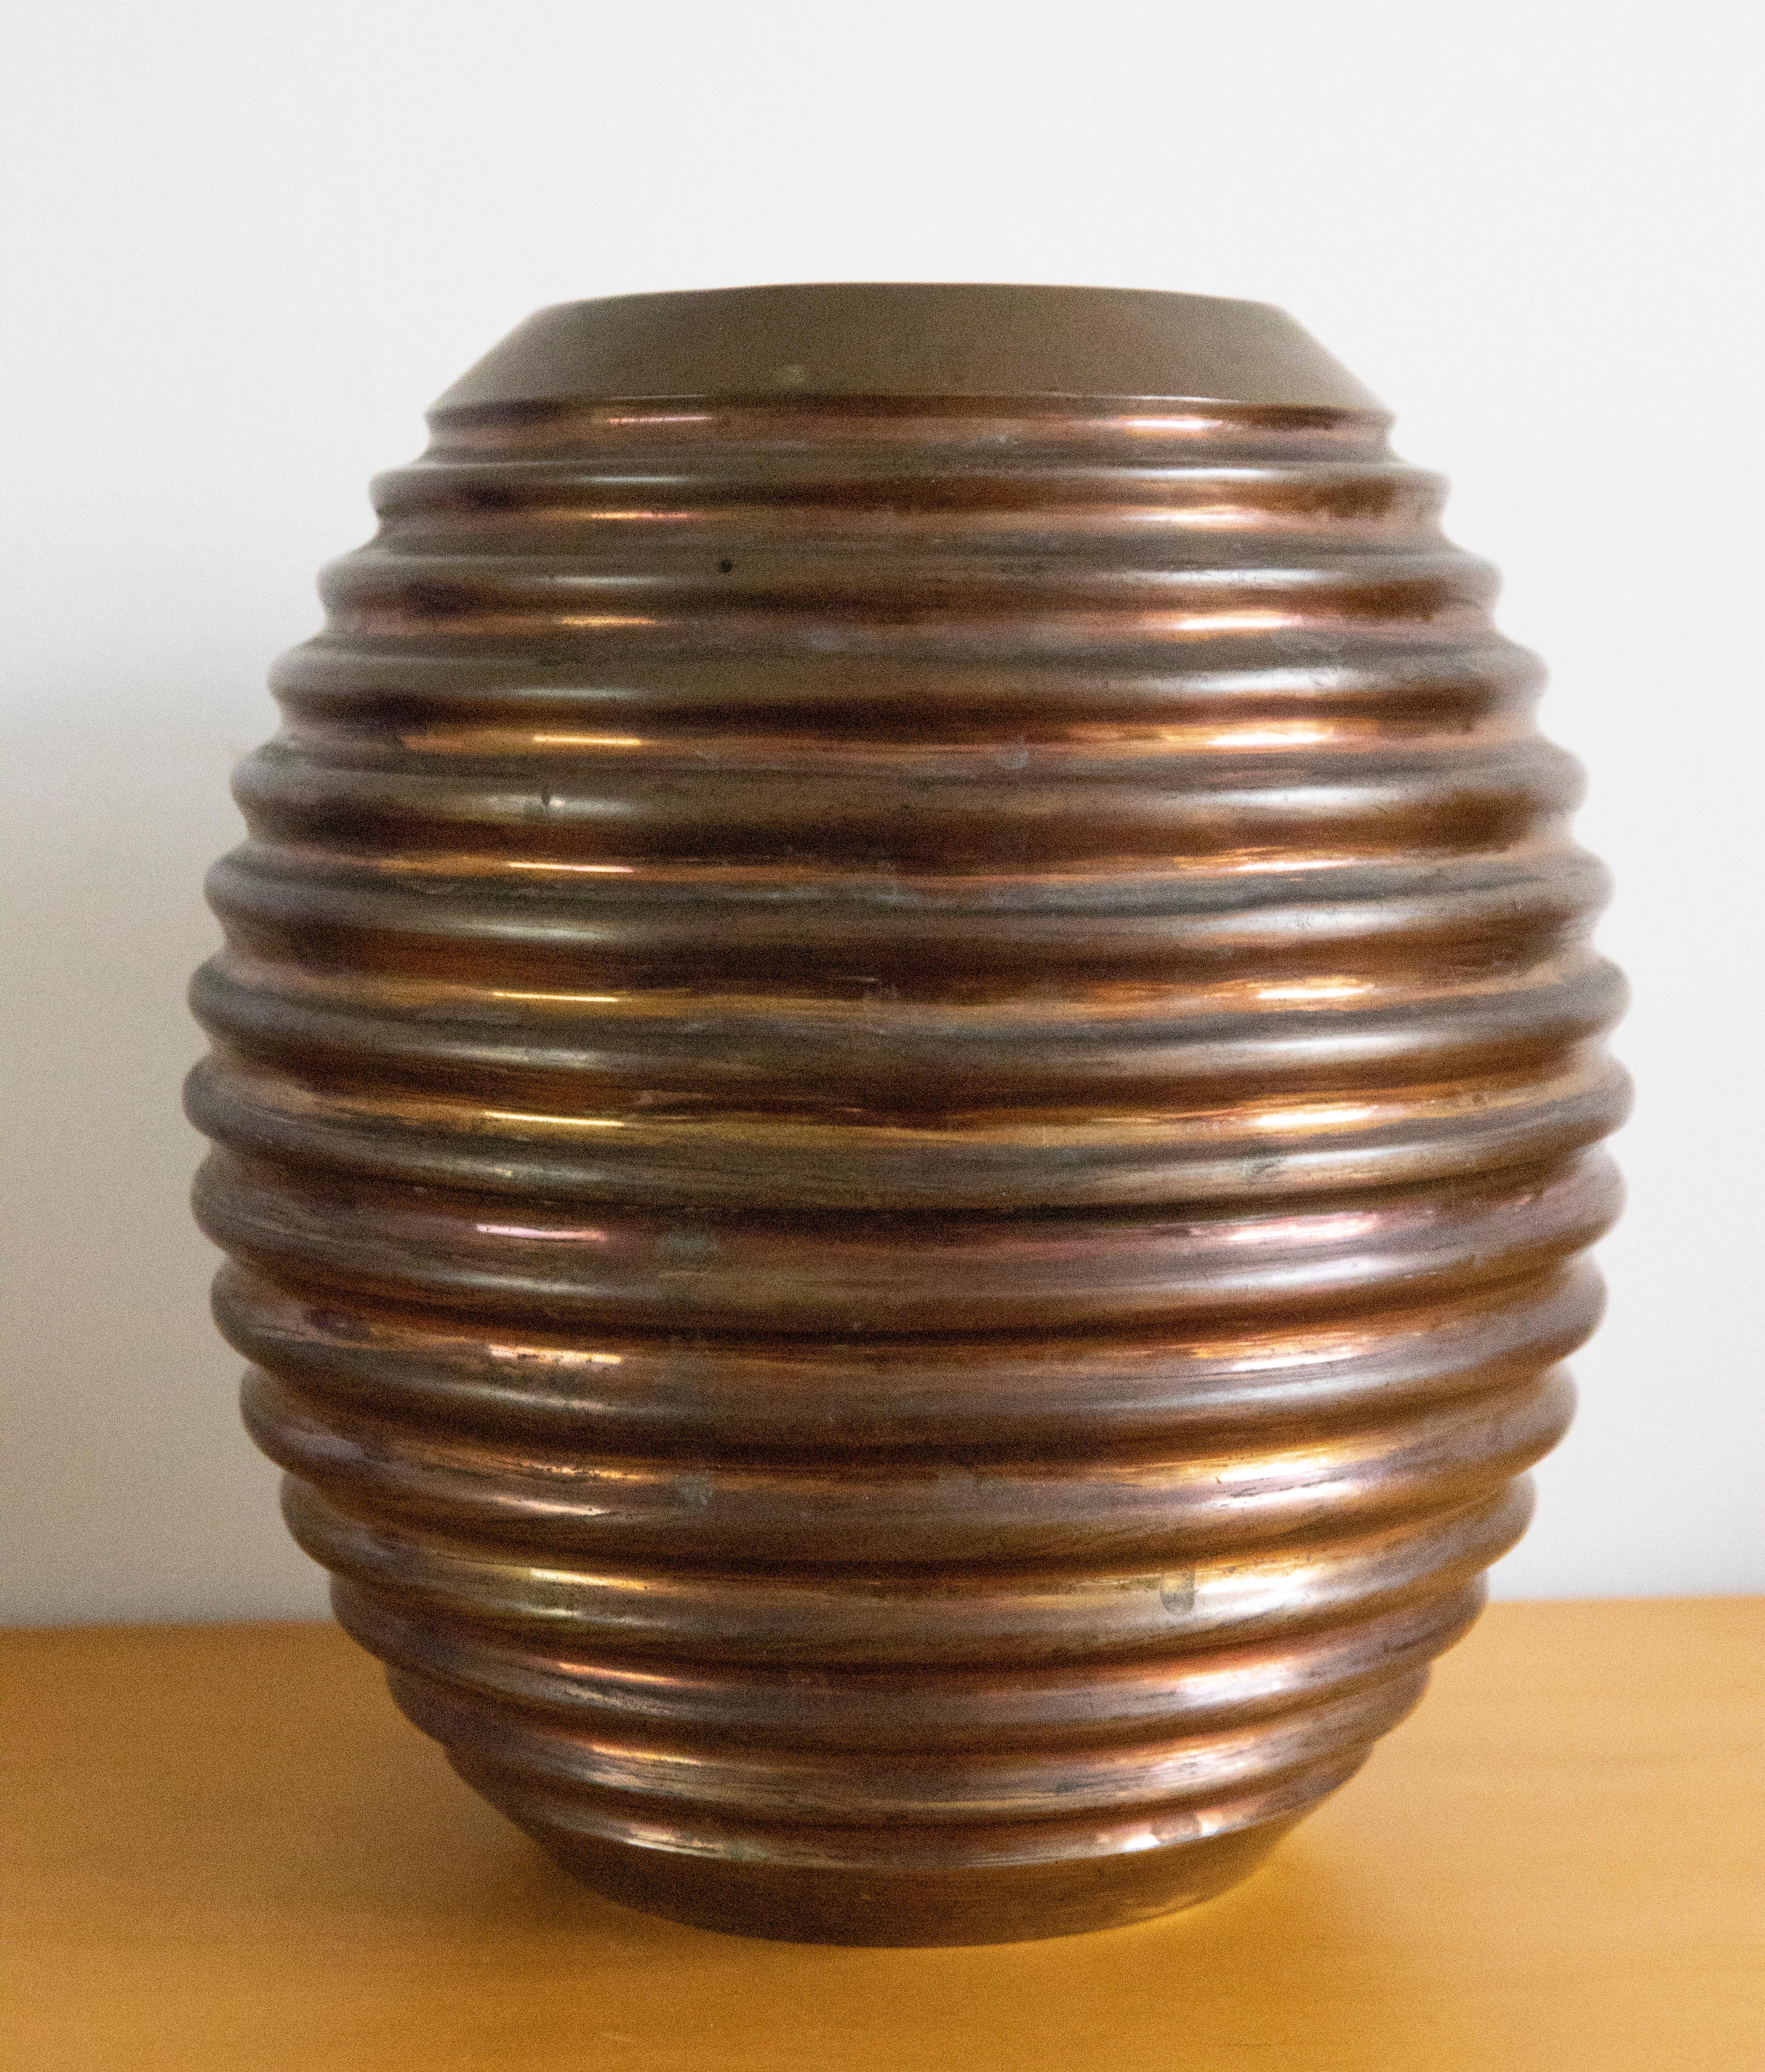 Large copper deco vase, Italian manufacture

Stunning Italian-made brass and copper lobed vase, created in the 1930s, with classic copper and brass deco stylings
